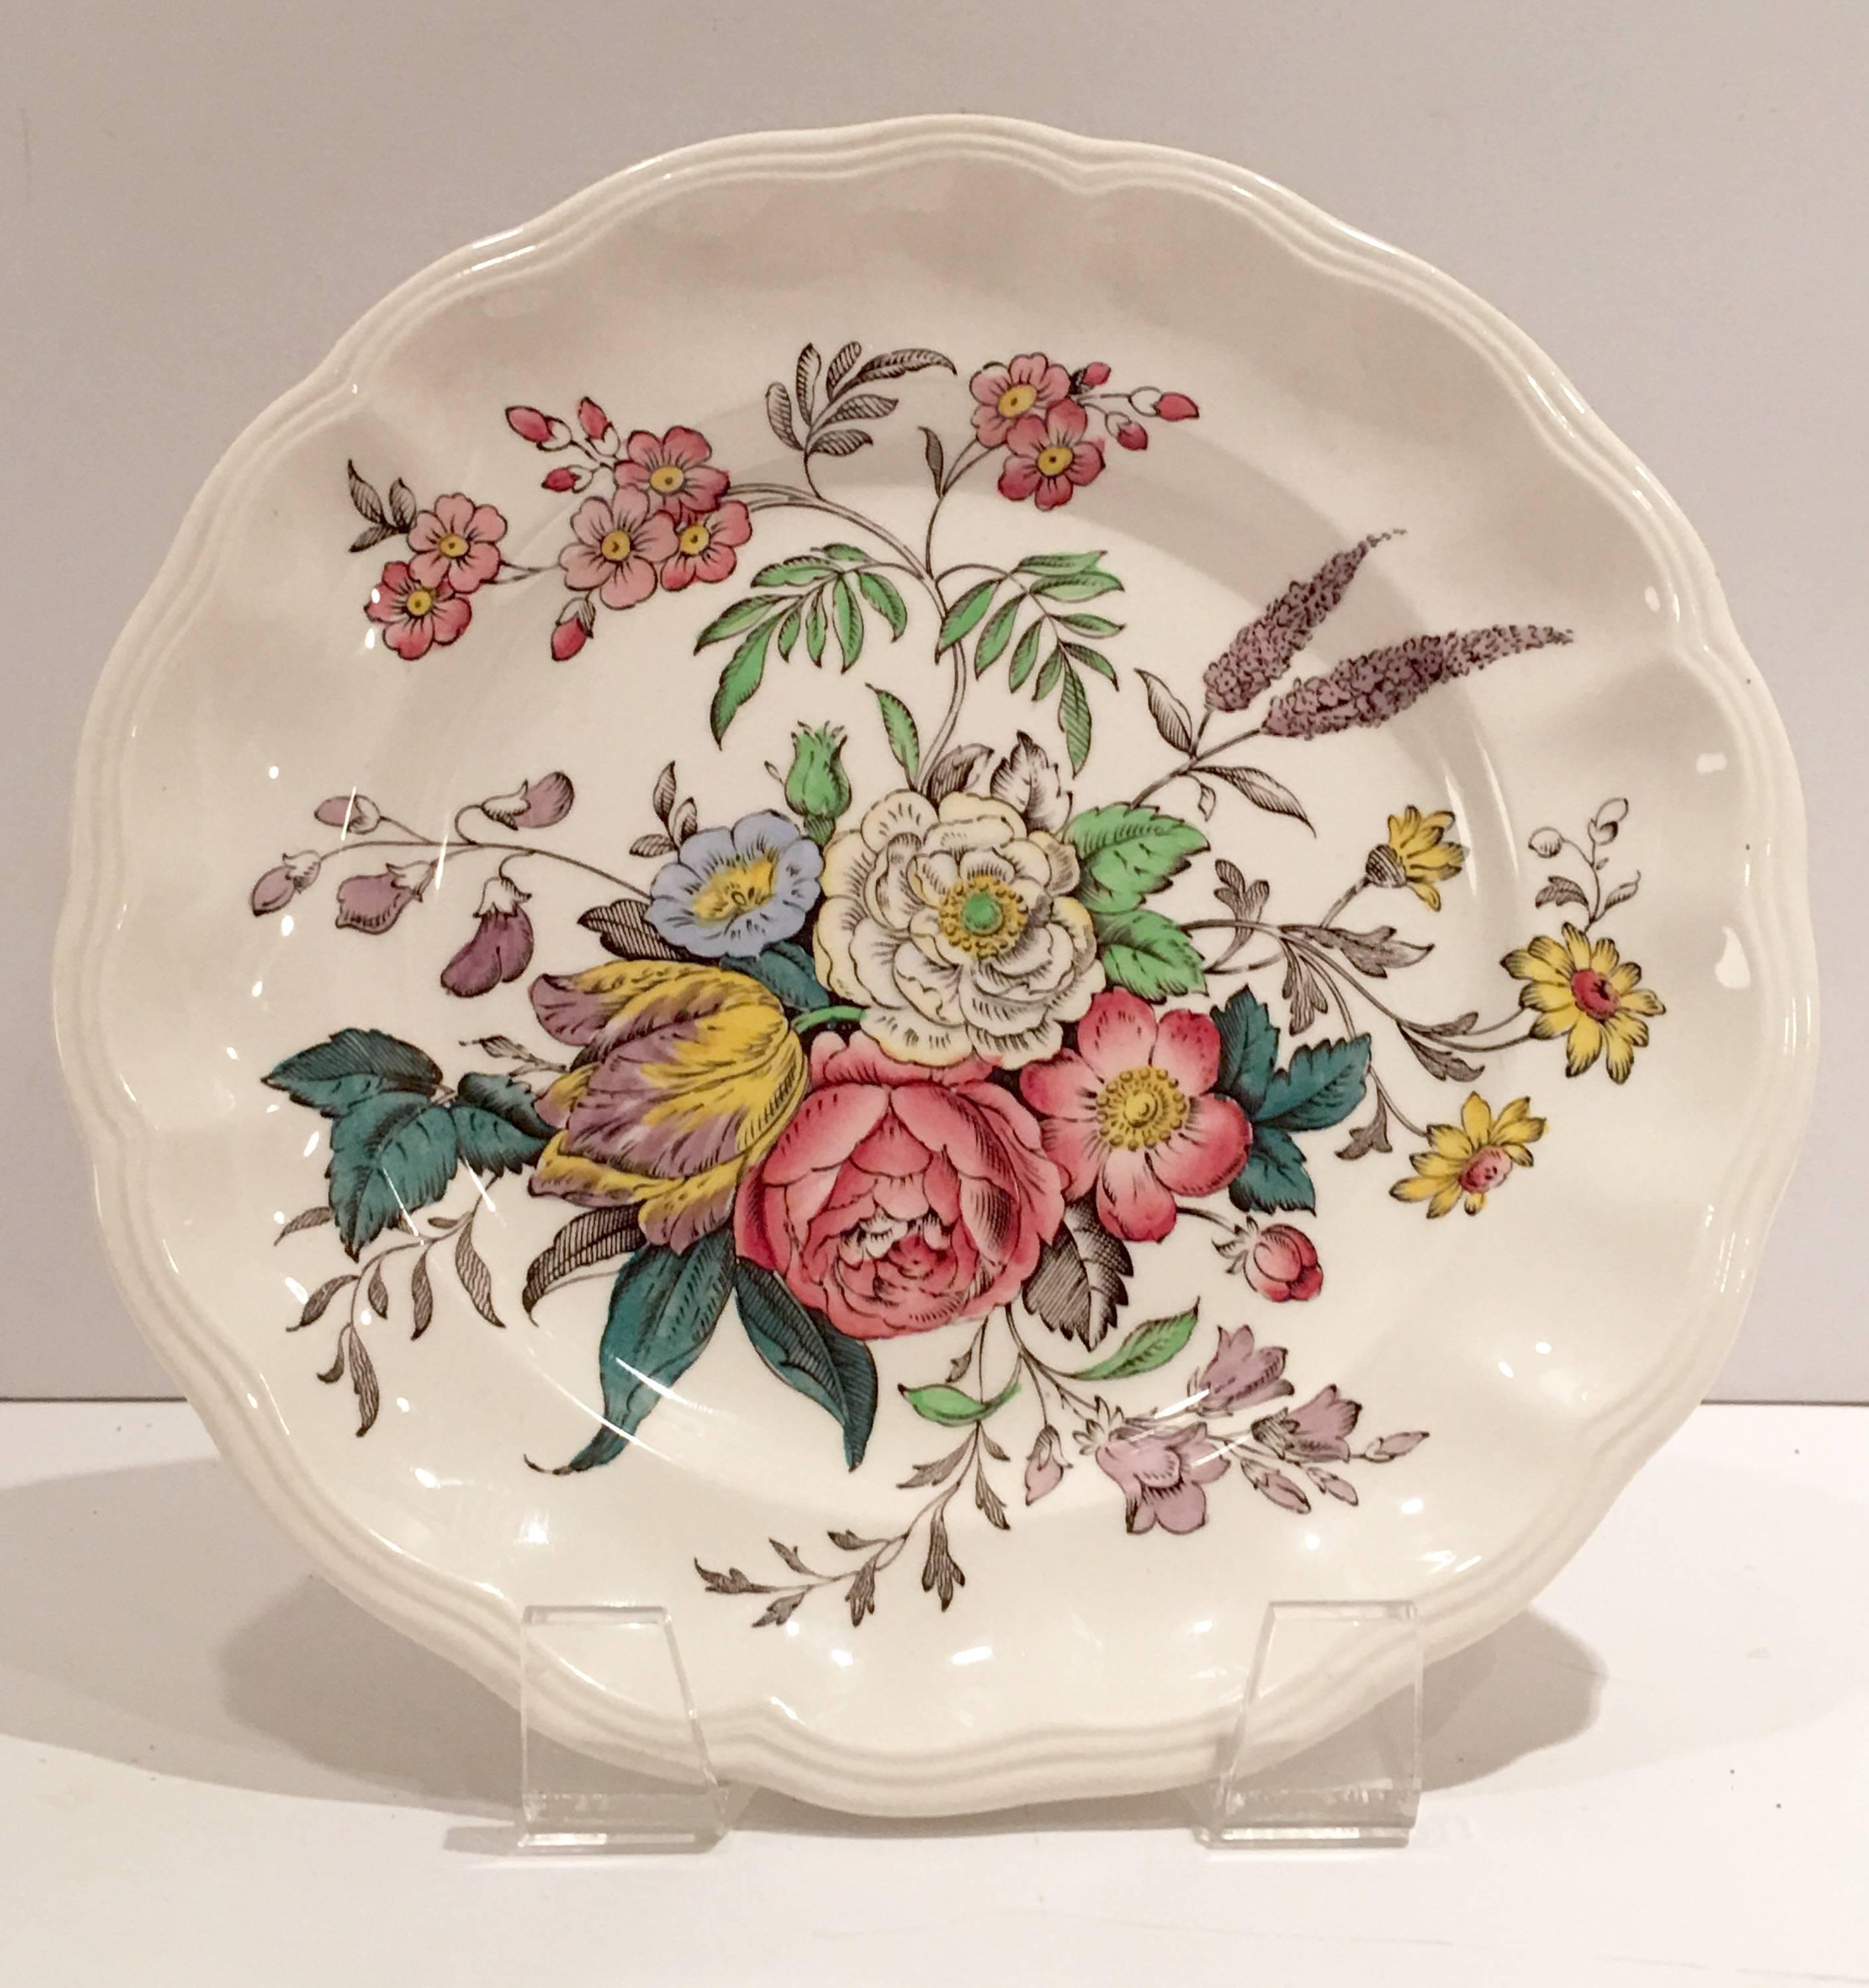 English transferware floral pattern with a scalloped edge first introduced in 1954, "Gainsborough" by, Copeland Spode. This 34 piece set includes, eight dinner plates, 10" diameter, eight salad or dessert plates, 7.25" diameter,